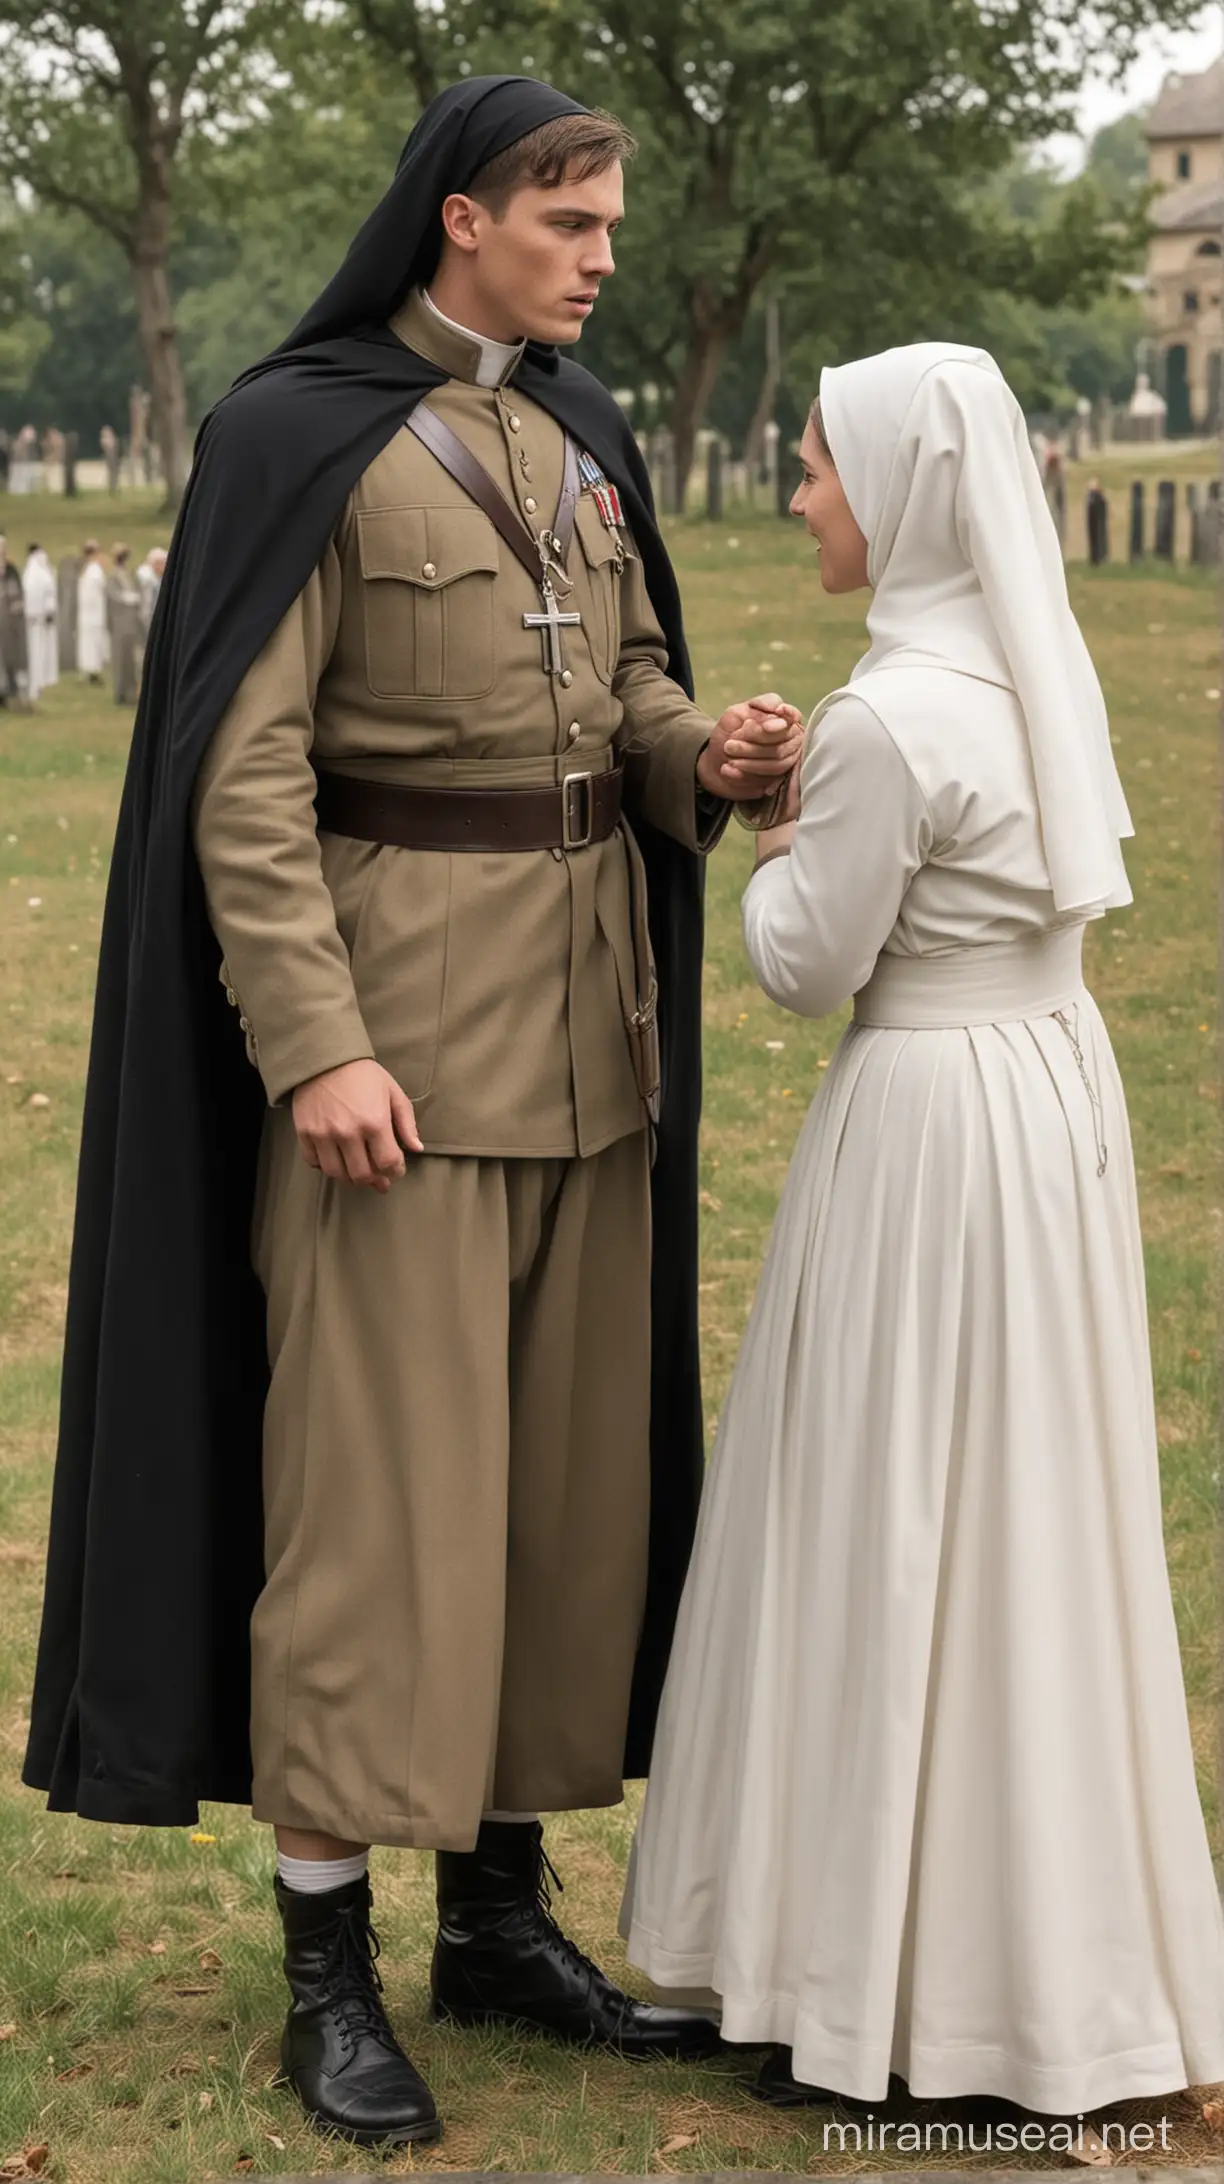 A soldier, out of breath, approaches a nun and asks her permission to hide under her skirt. He promises to explain everything later.